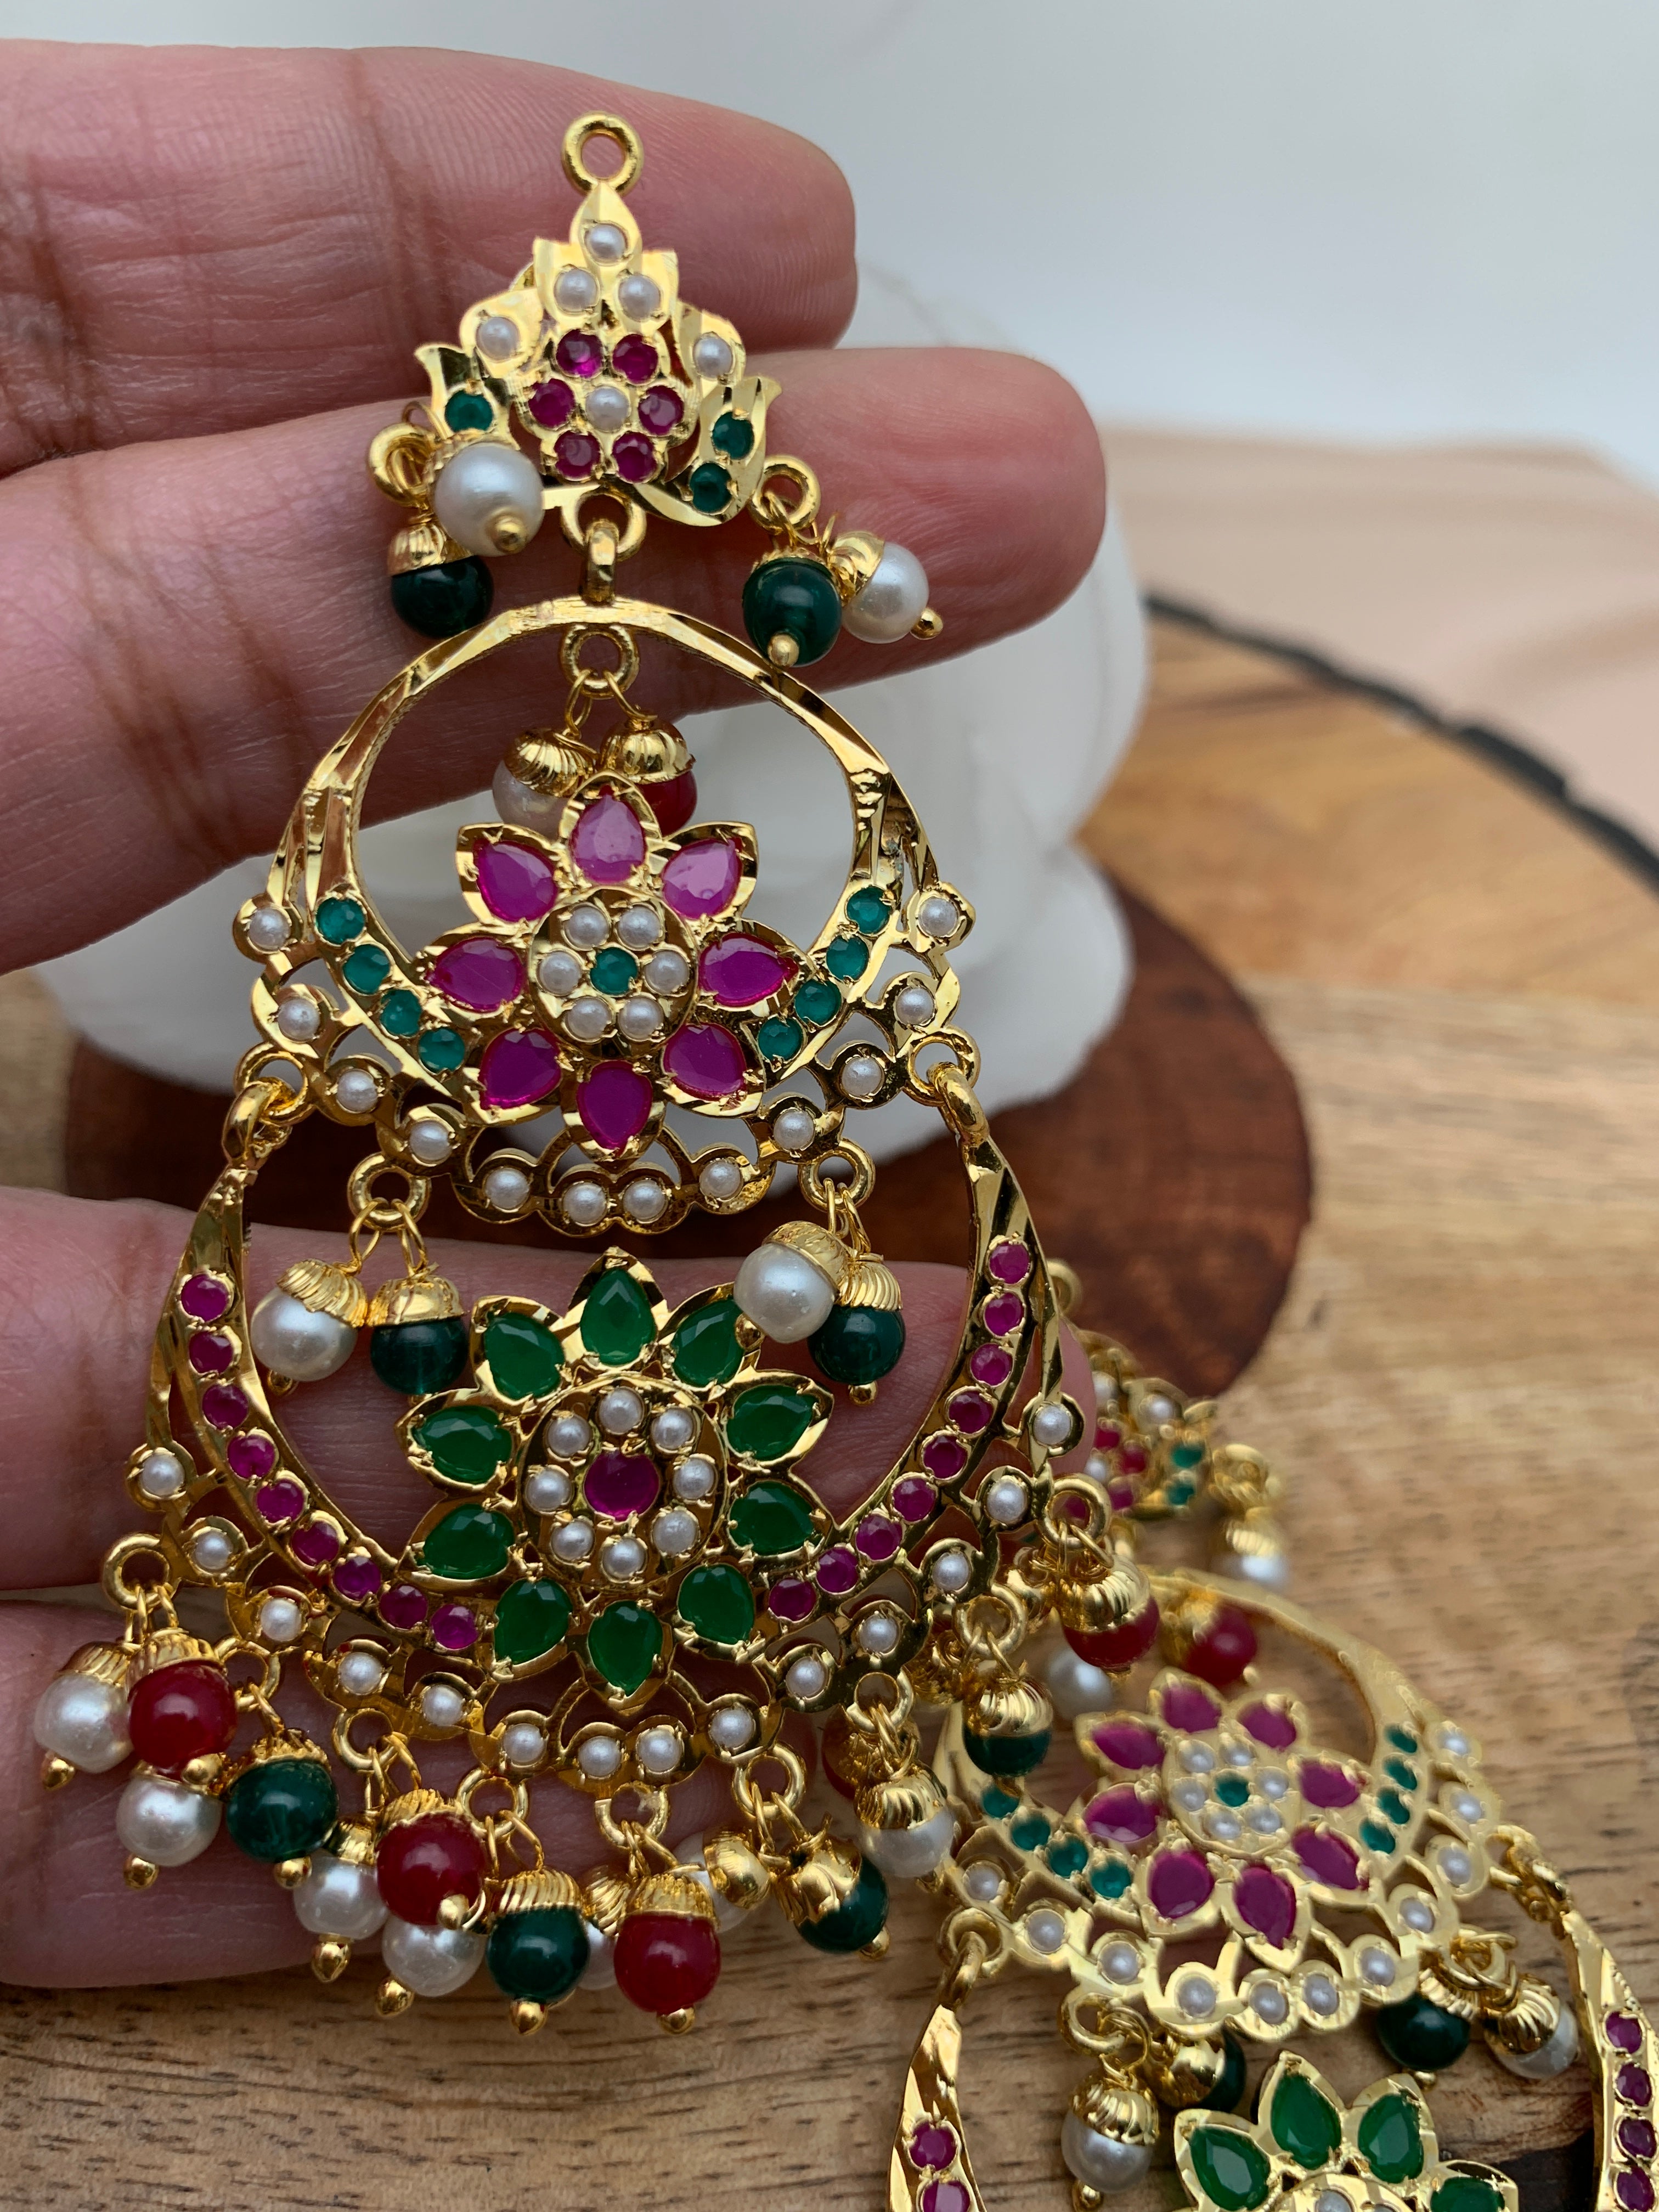 23k Gold and Diamond Polki Chand Bali Earring Pair enhanced with Rubies and  Antiqued Hyderabadi Pearls [Video] [Video] | Chandbali earrings, Earring  pair, Earrings